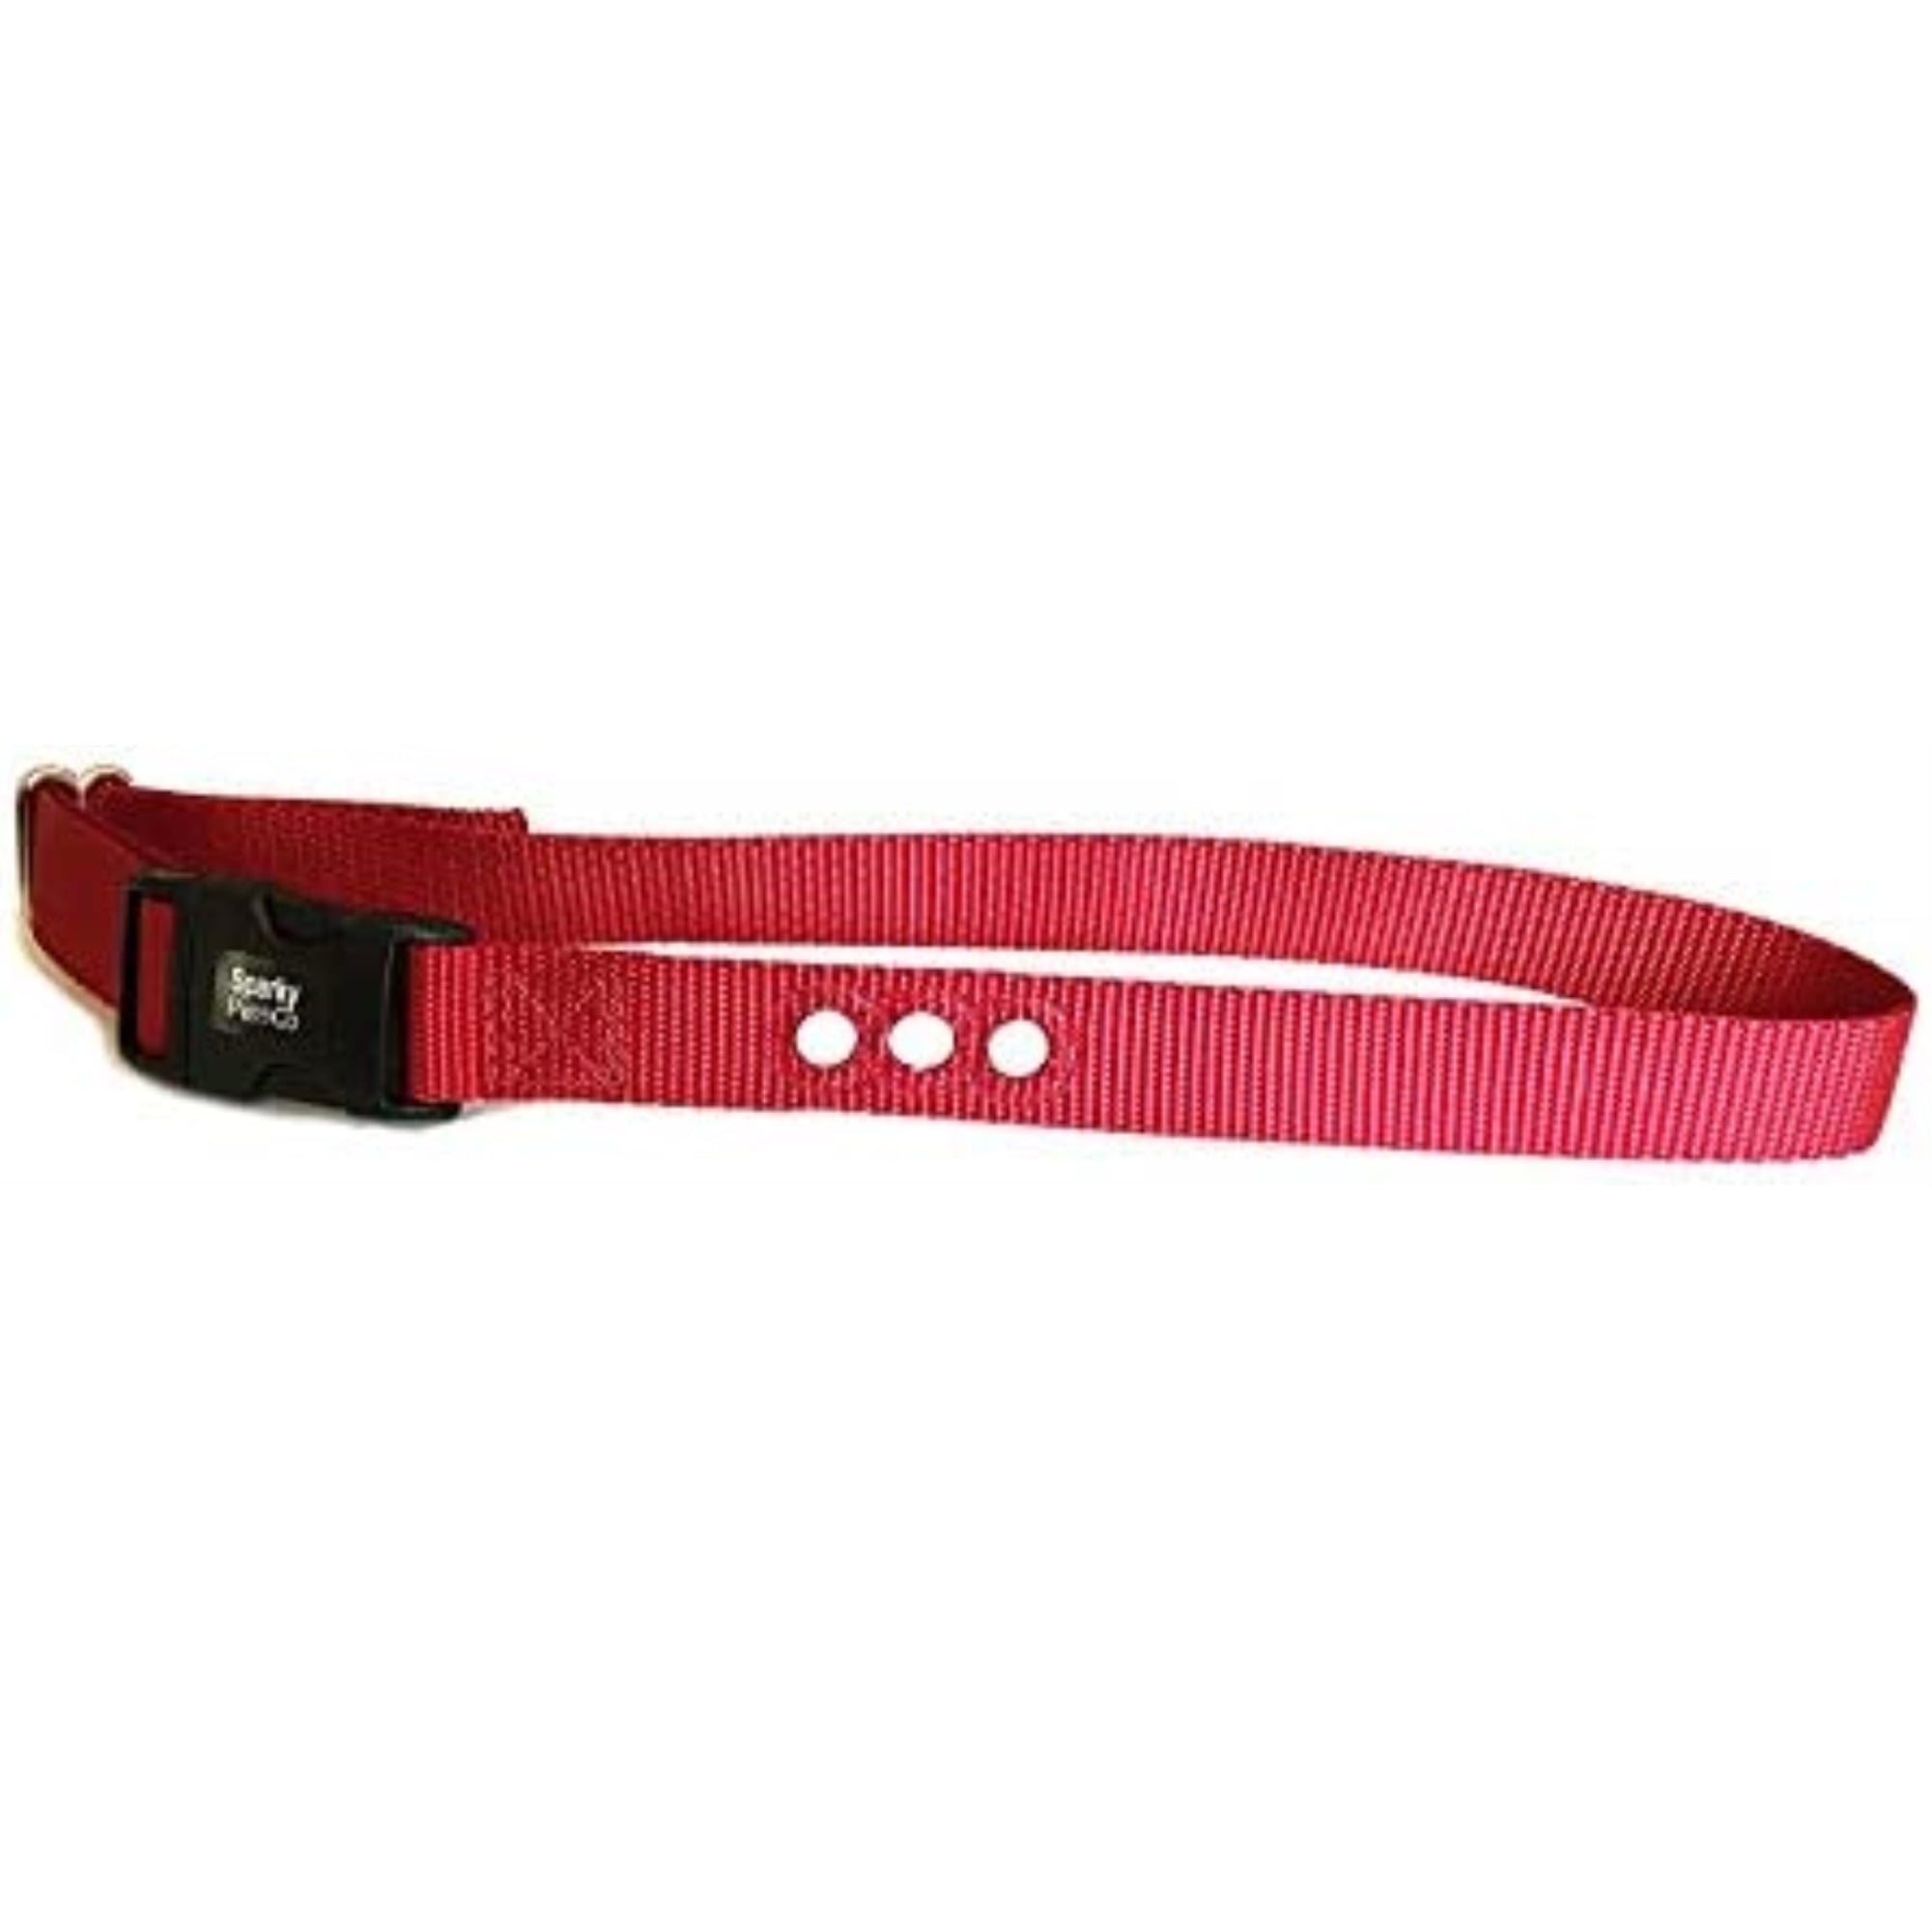 Grain Valley 1" Replacement Dog Collar Strap, Red